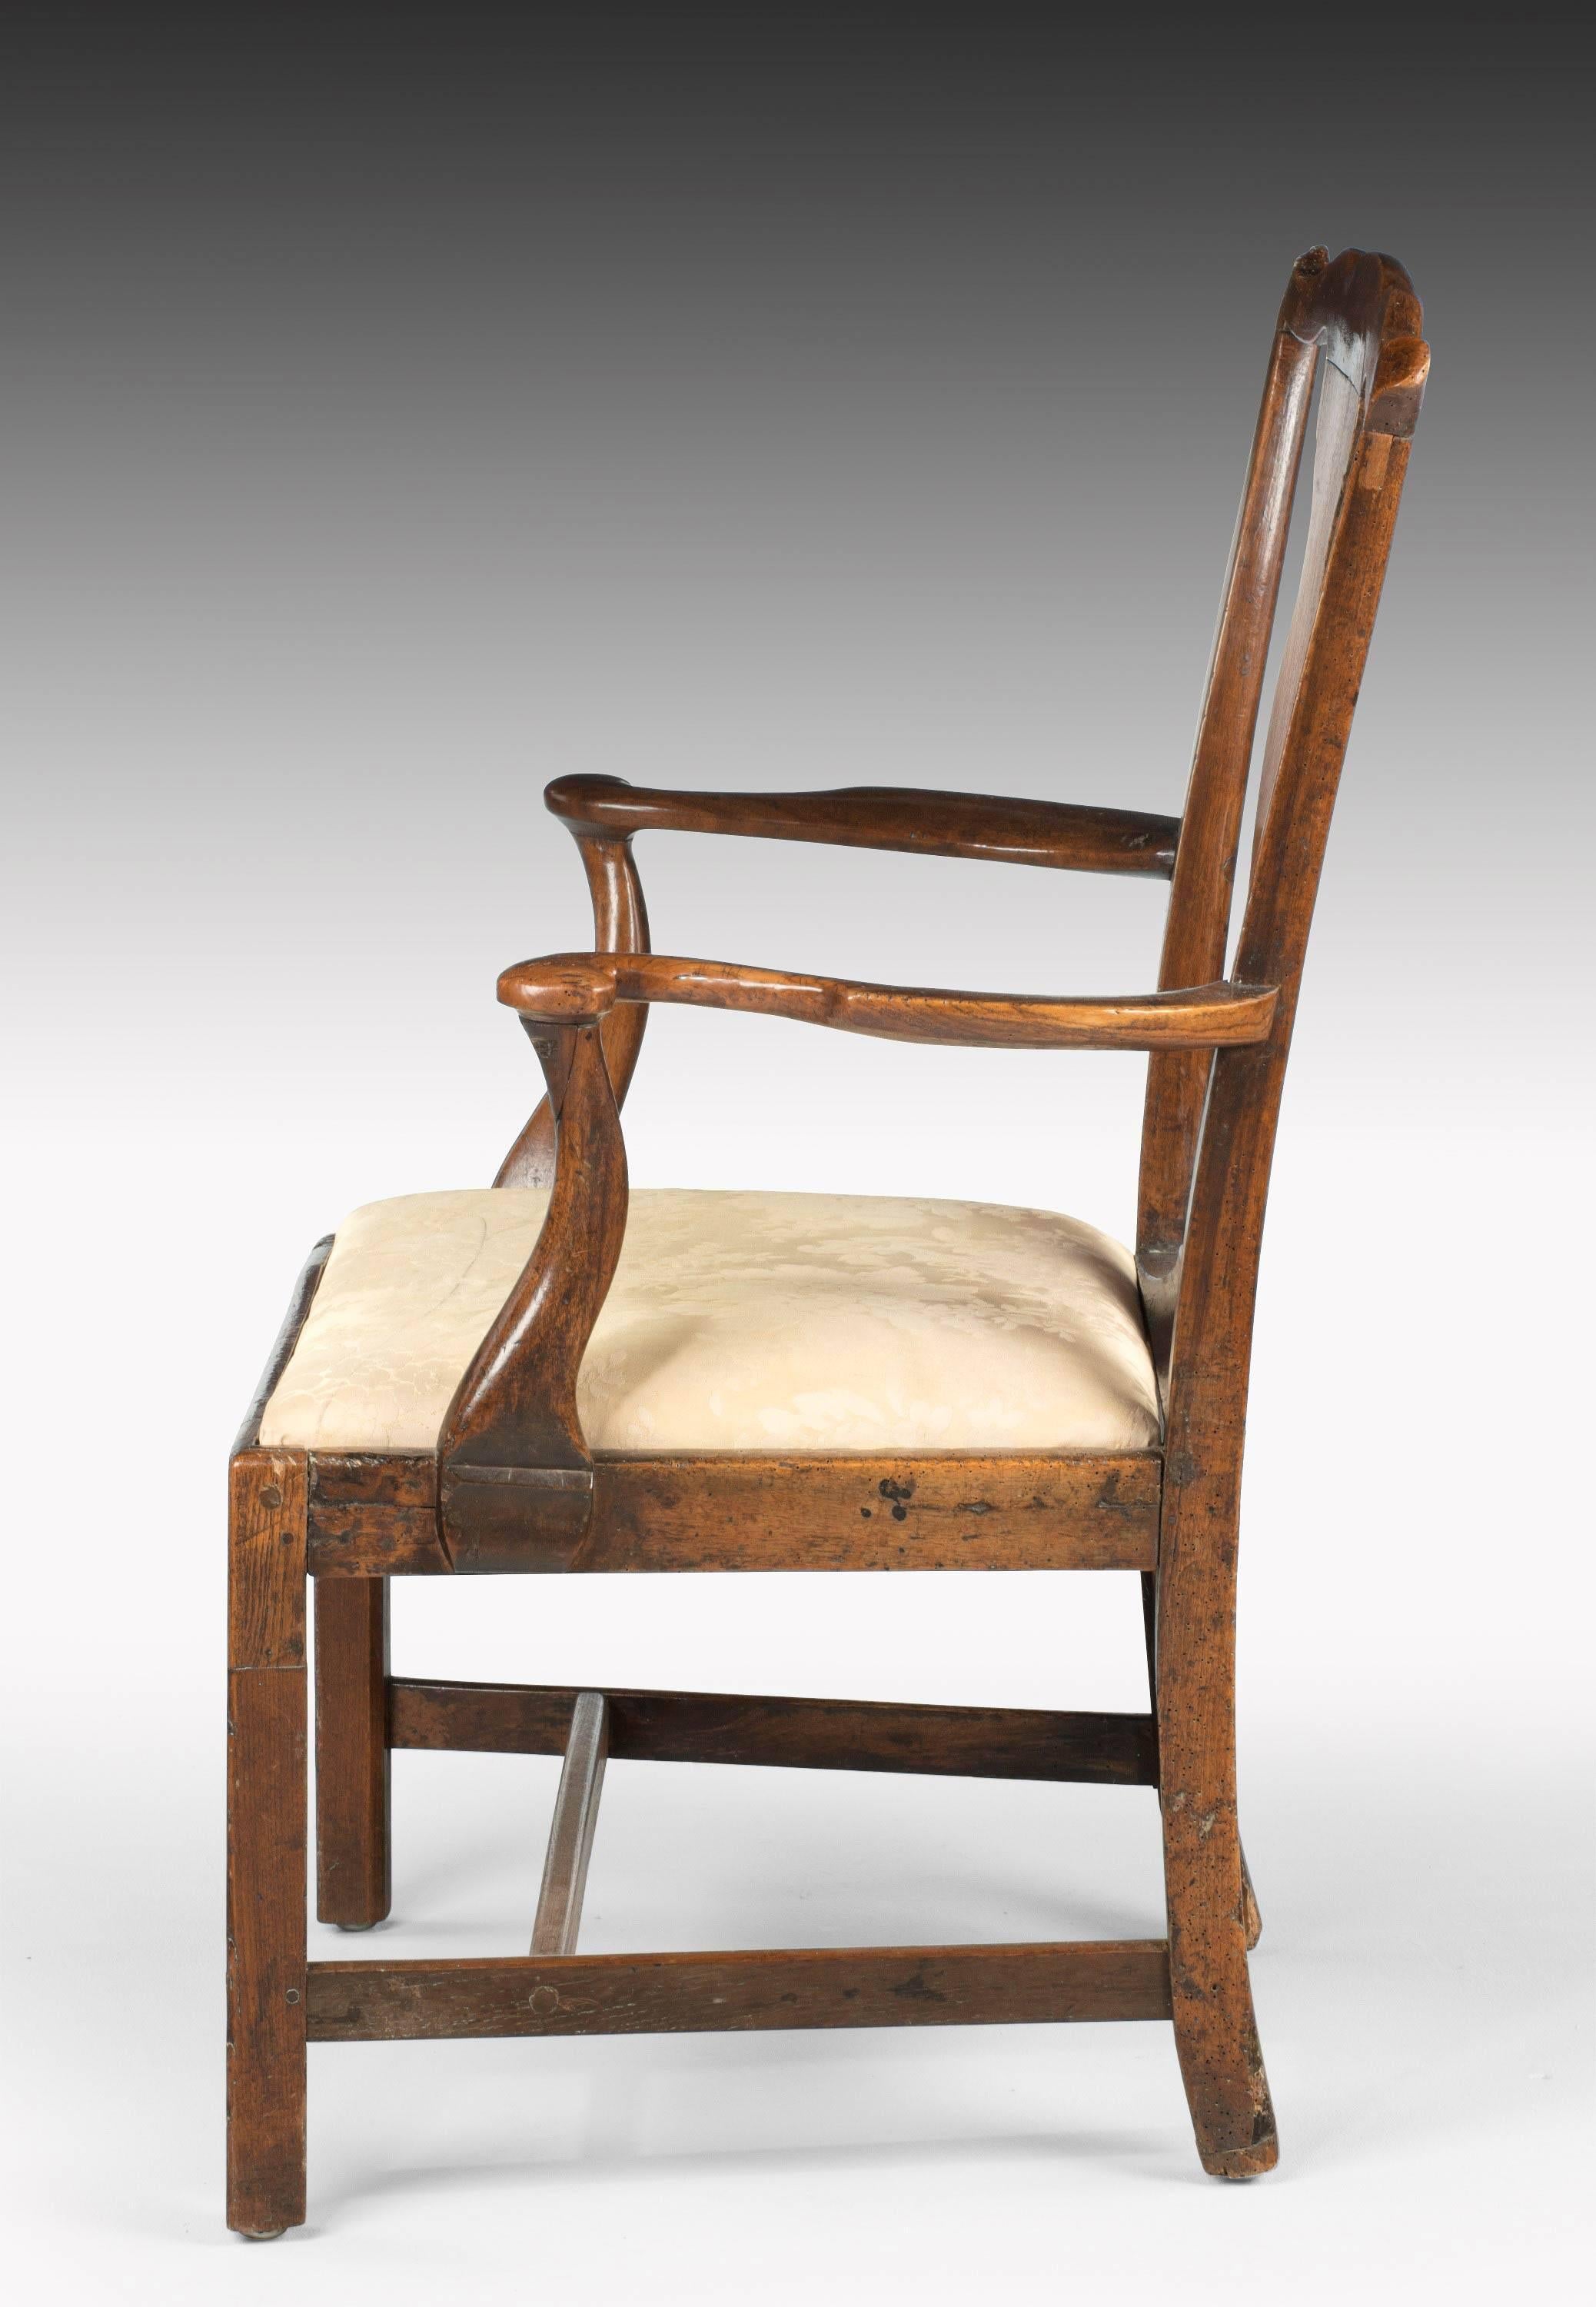 English Mid-18th Century Elbow Chair of Very Substantial Proportions